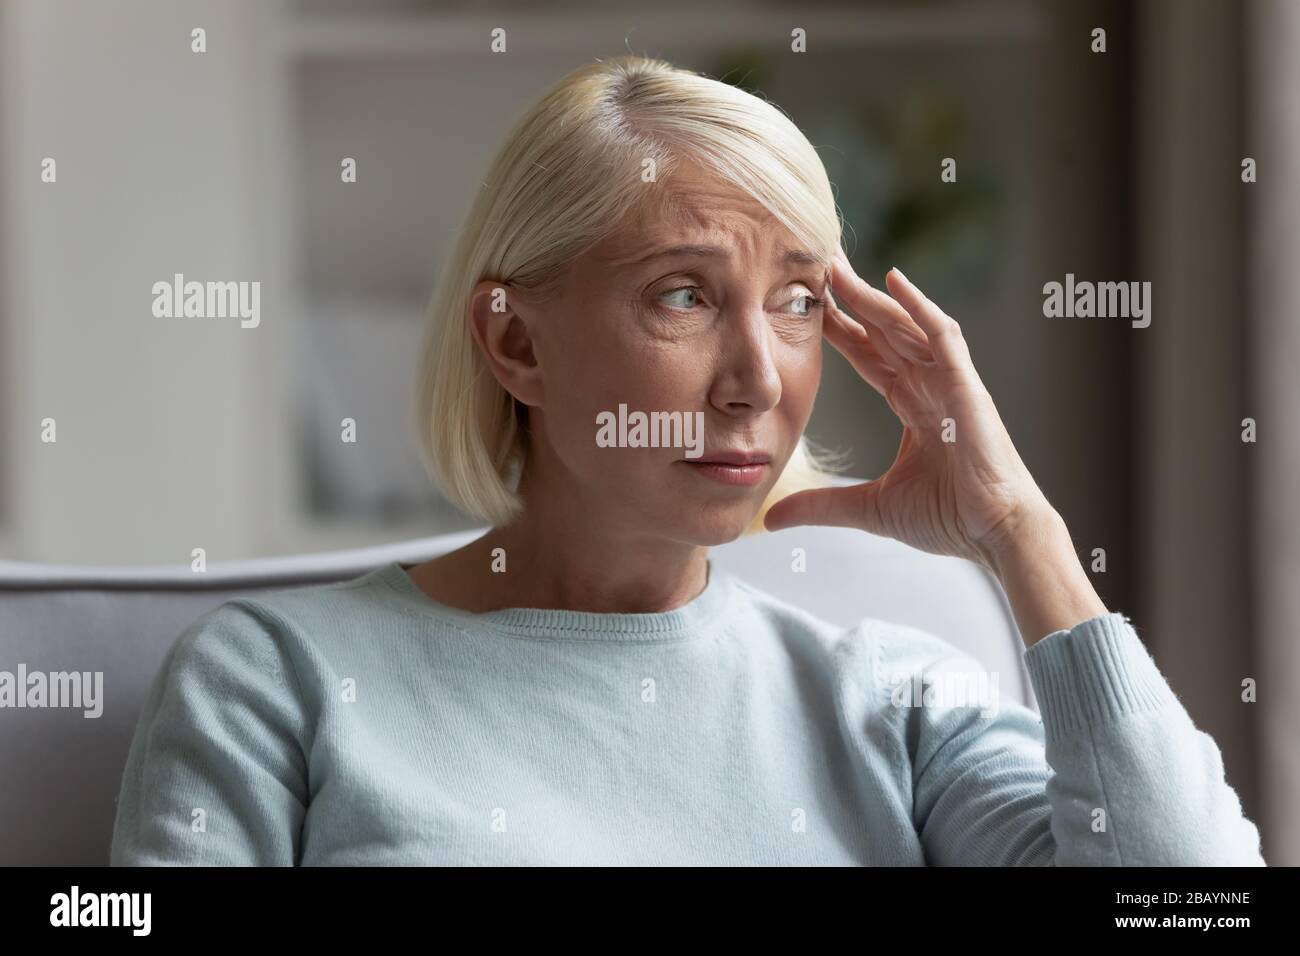 Distressed elderly woman feel lonely at home Stock Photo